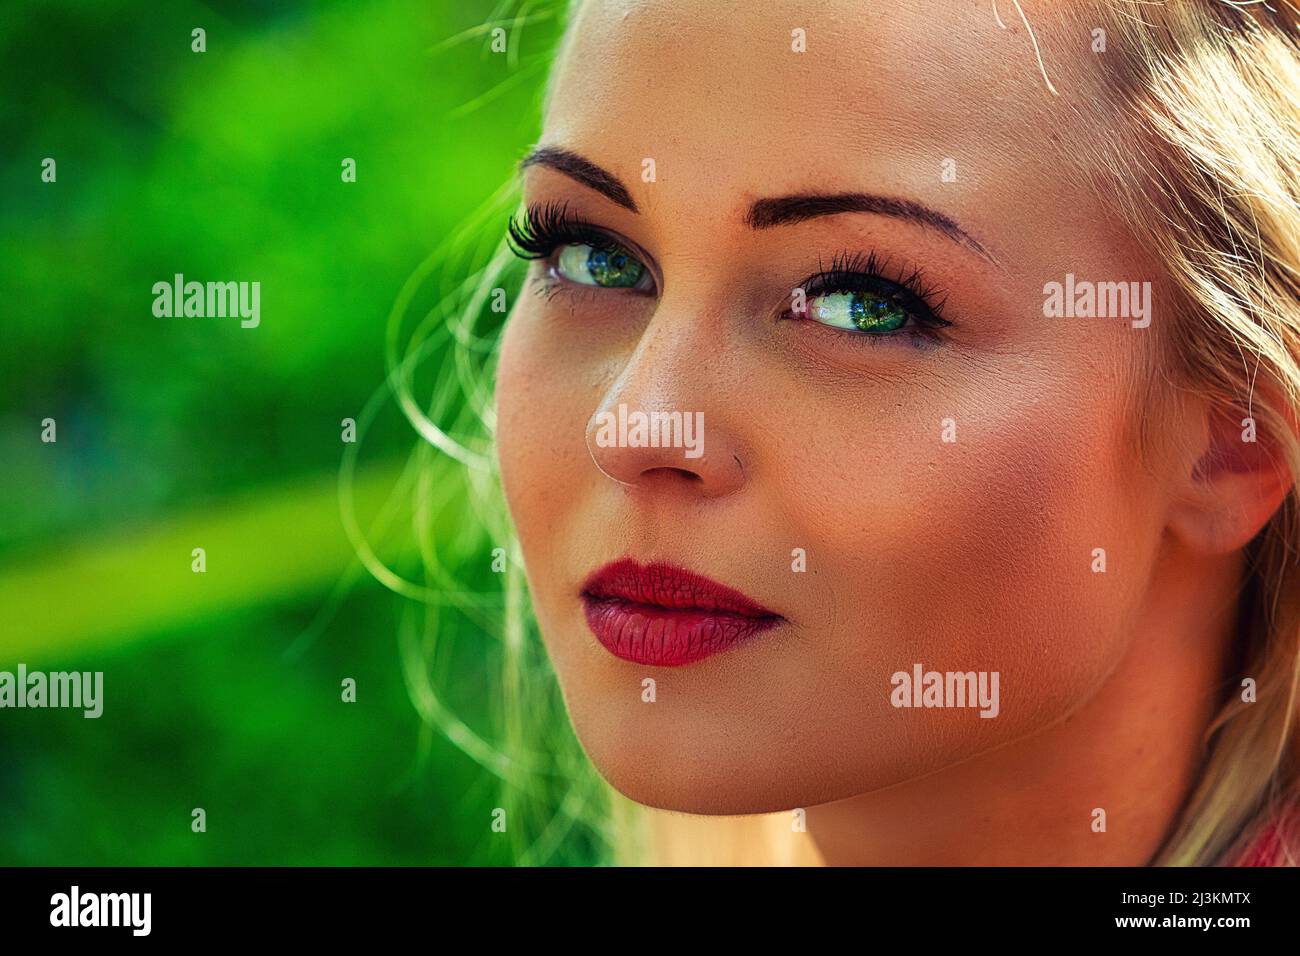 Attractive young blond woman wearing makeup turning to look quietly at camera with lovely blue eyes in a close up cropped face portrait outdoors again Stock Photo